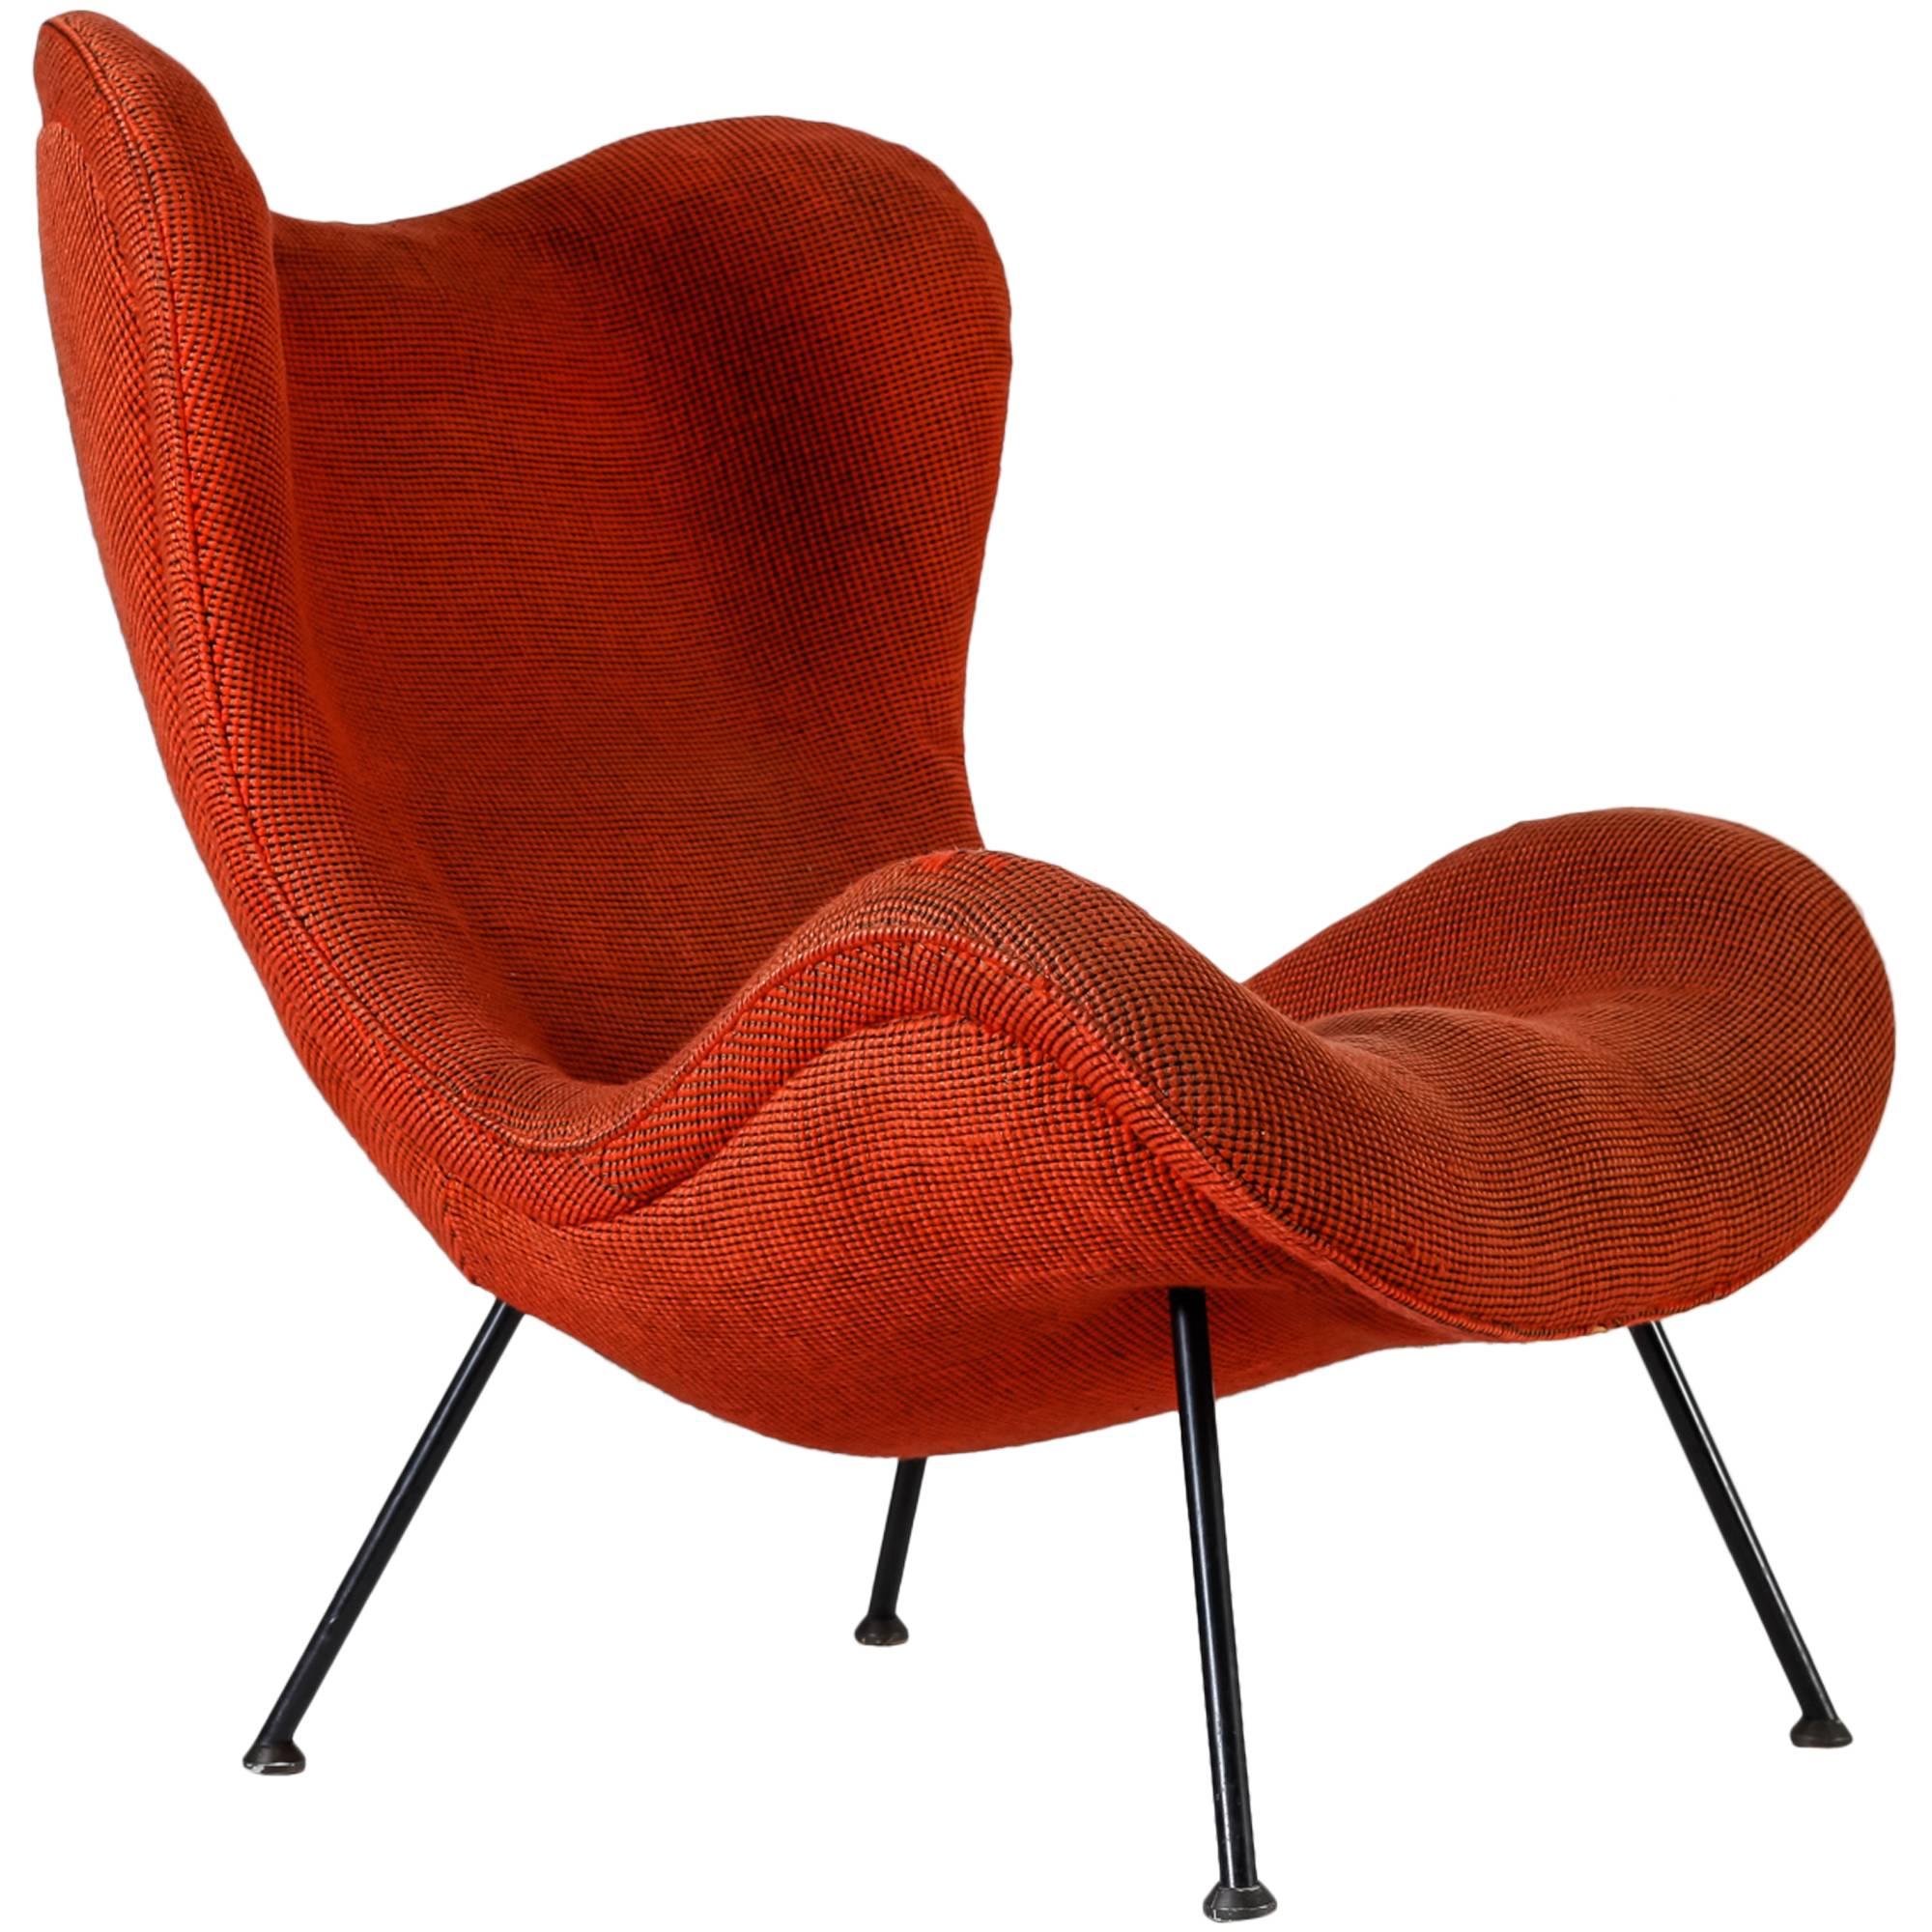 Fritz Neth 'Madame' red wingback lounge chair, Germany, 1950s For Sale